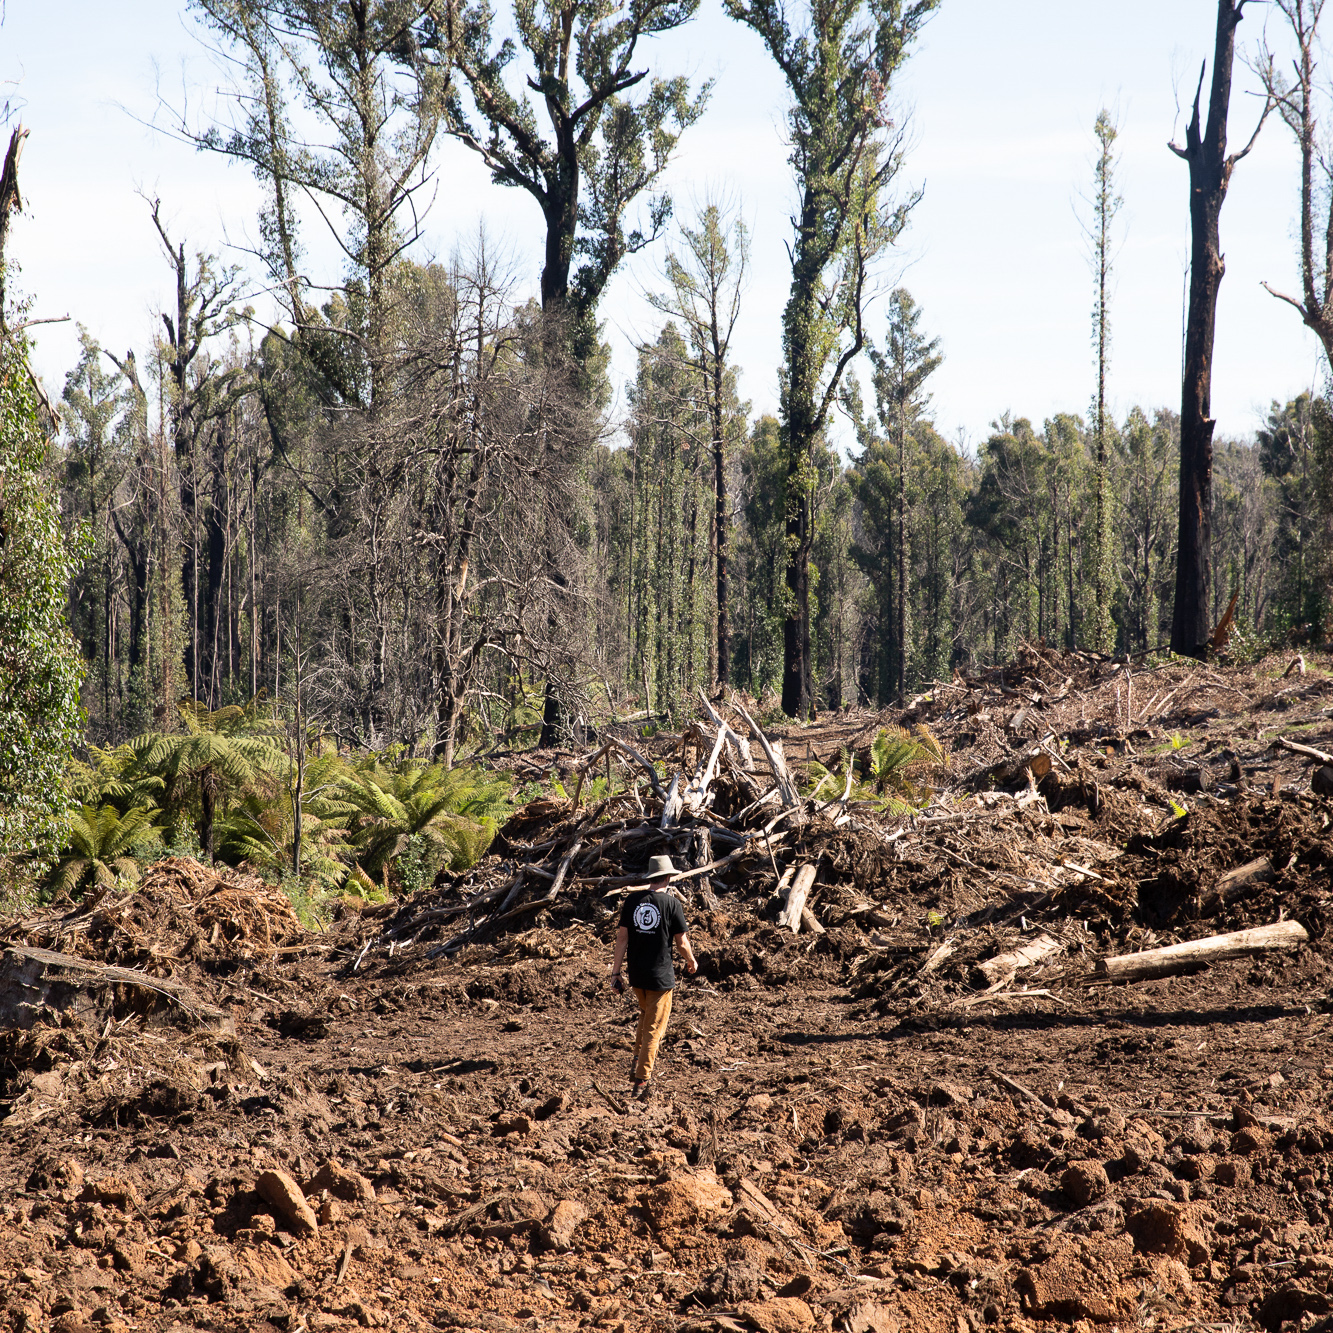 A photograph of a new clearing made by the felling of native forest trees. A person wearing a Goongerah Environment Centre shirt is walking through the clearing with their back to the camera. The forest is visible in the background.